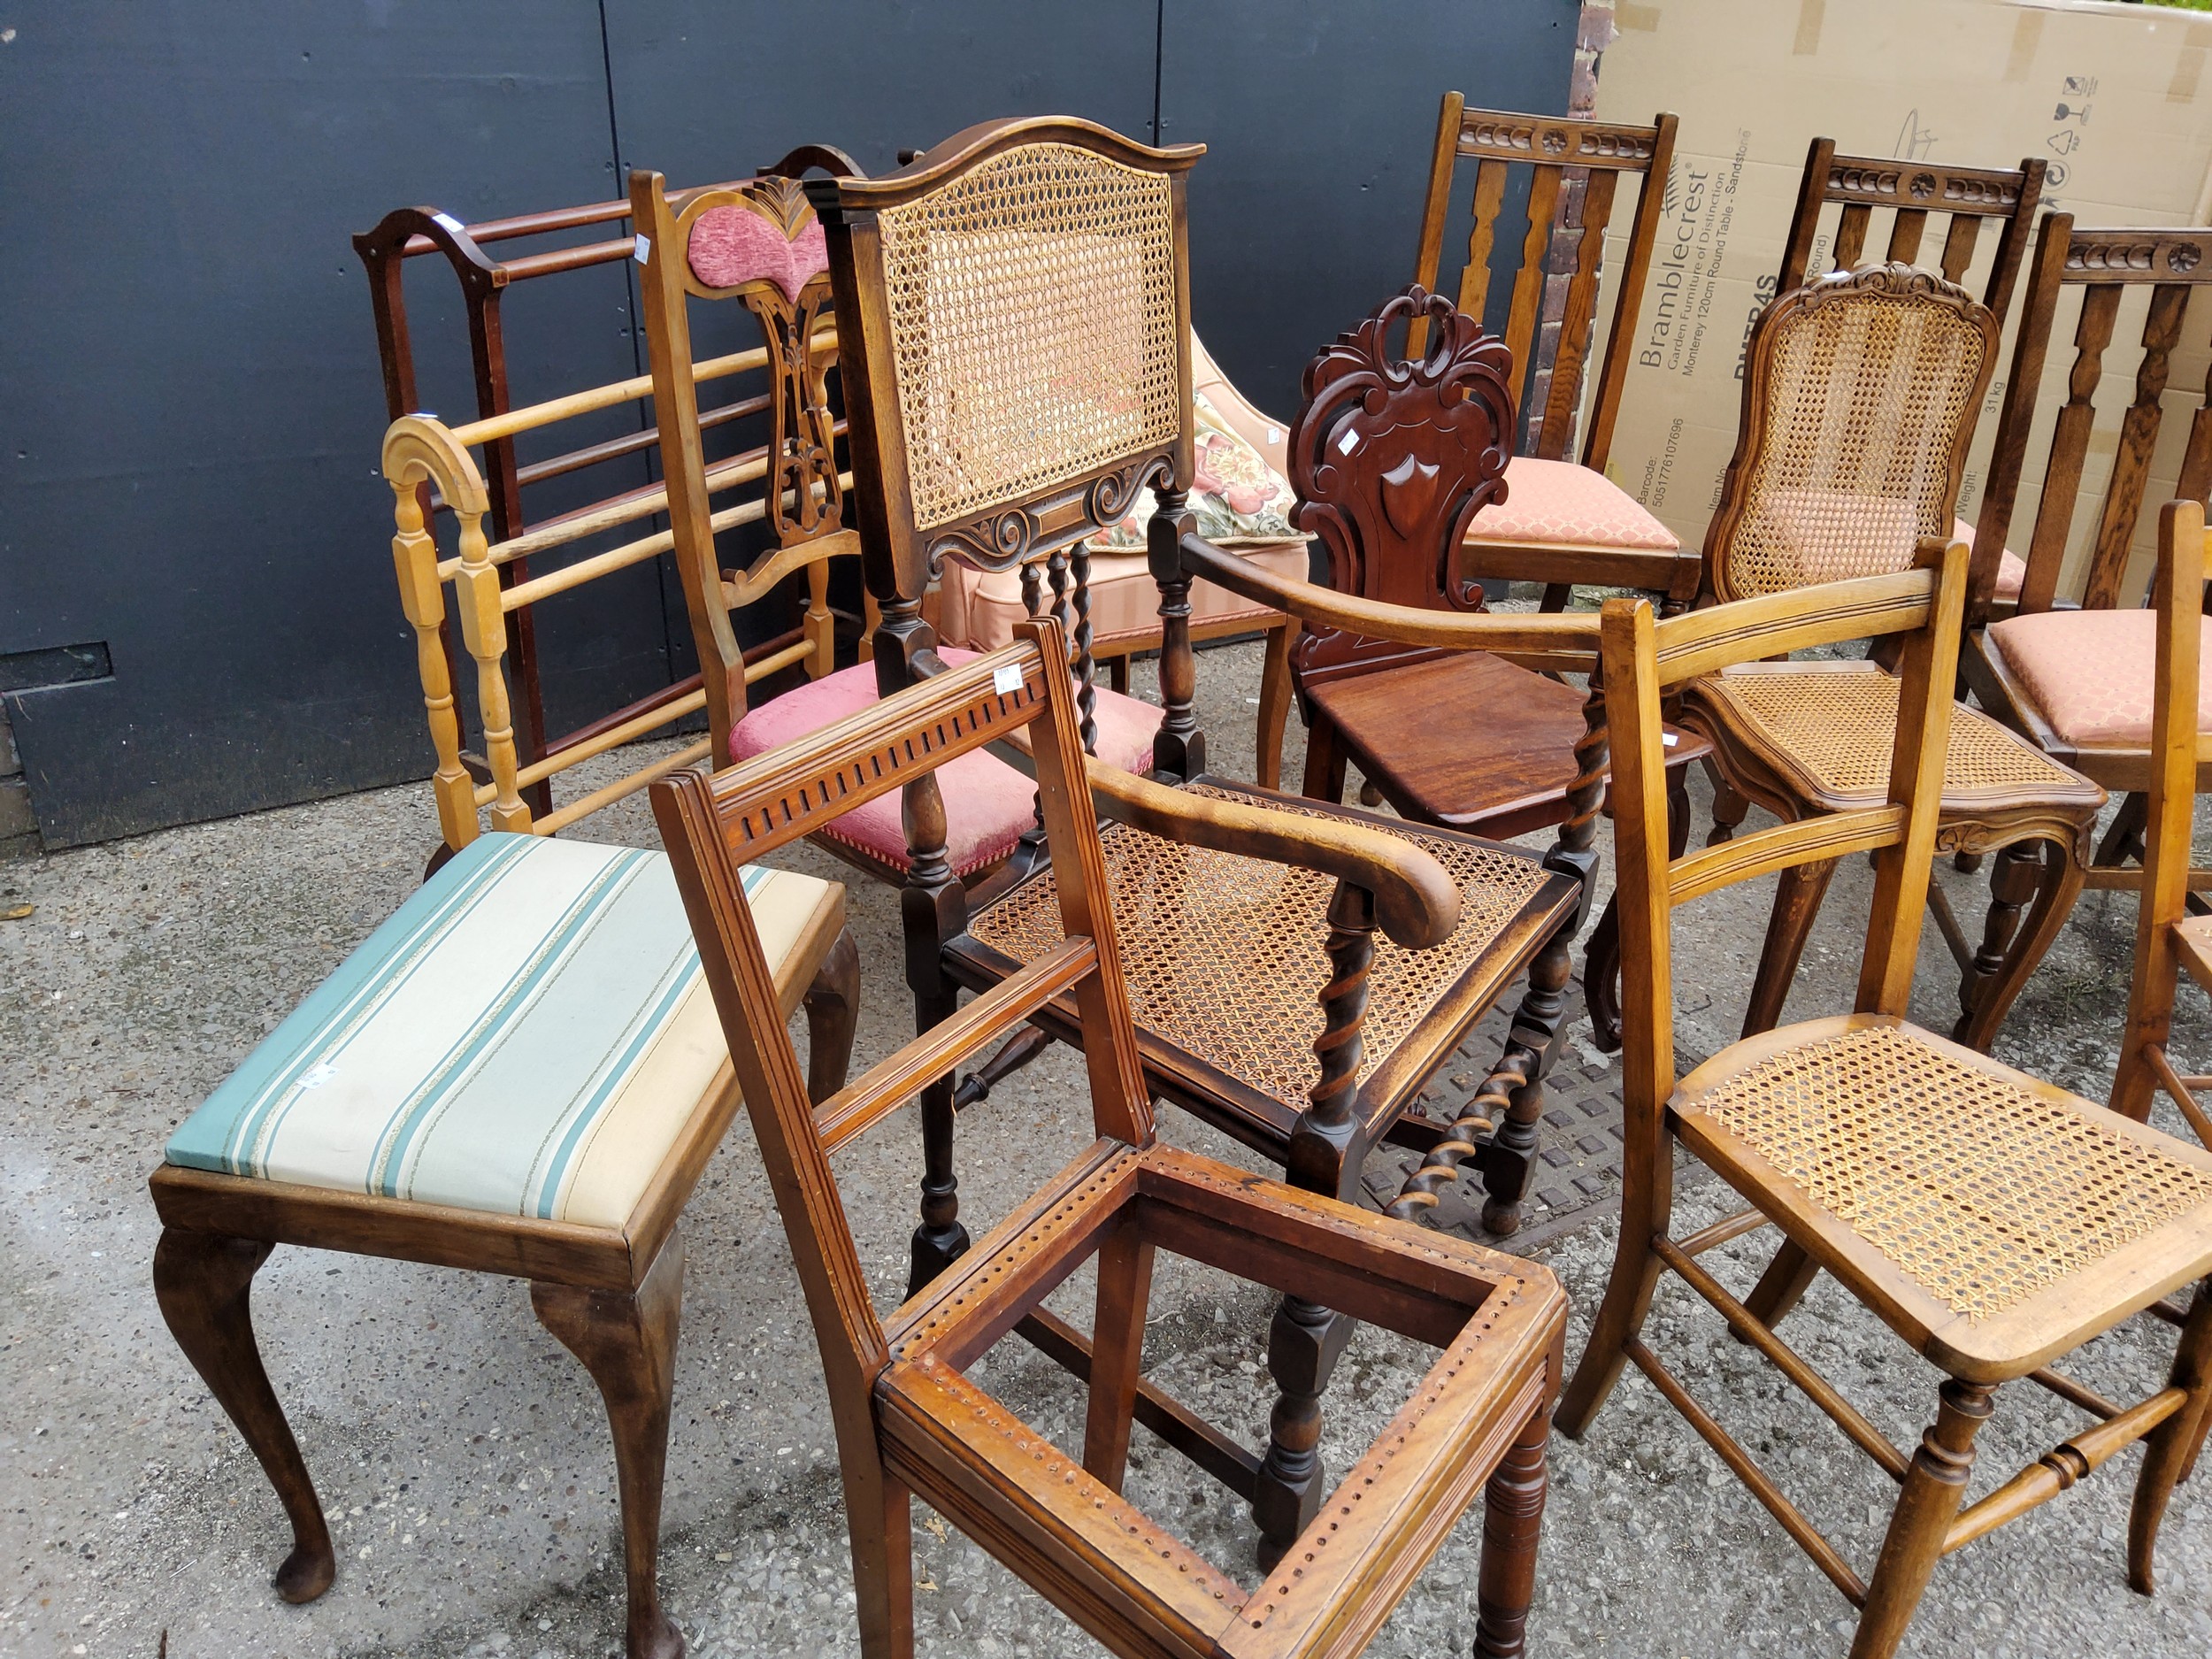 Harlequin set of chairs, footstool and towel racks, including a Victorian mahogany hall chair, - Image 3 of 4